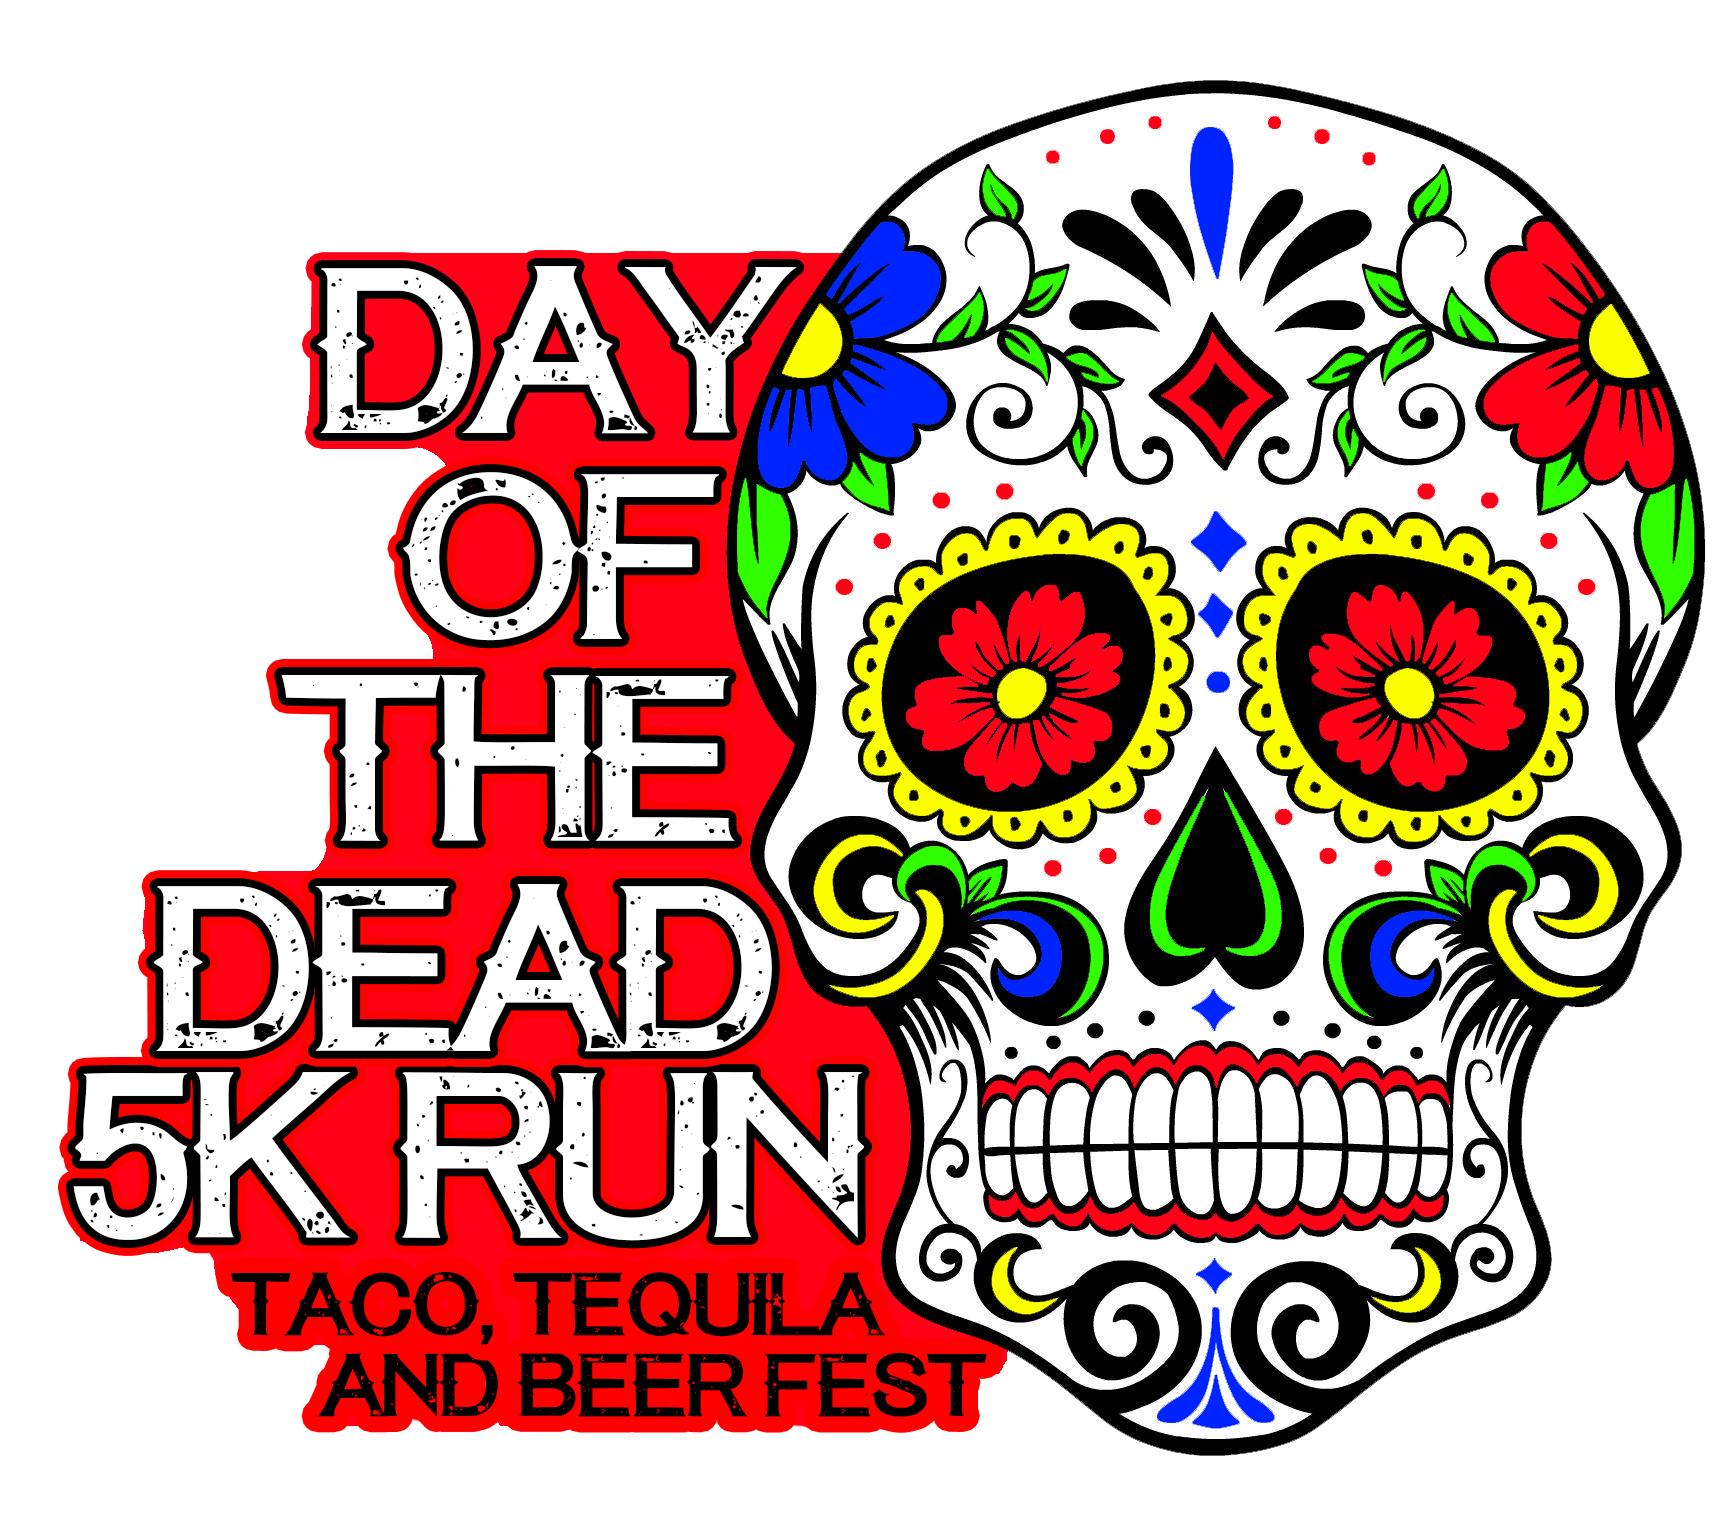 Day of the Dead 5K